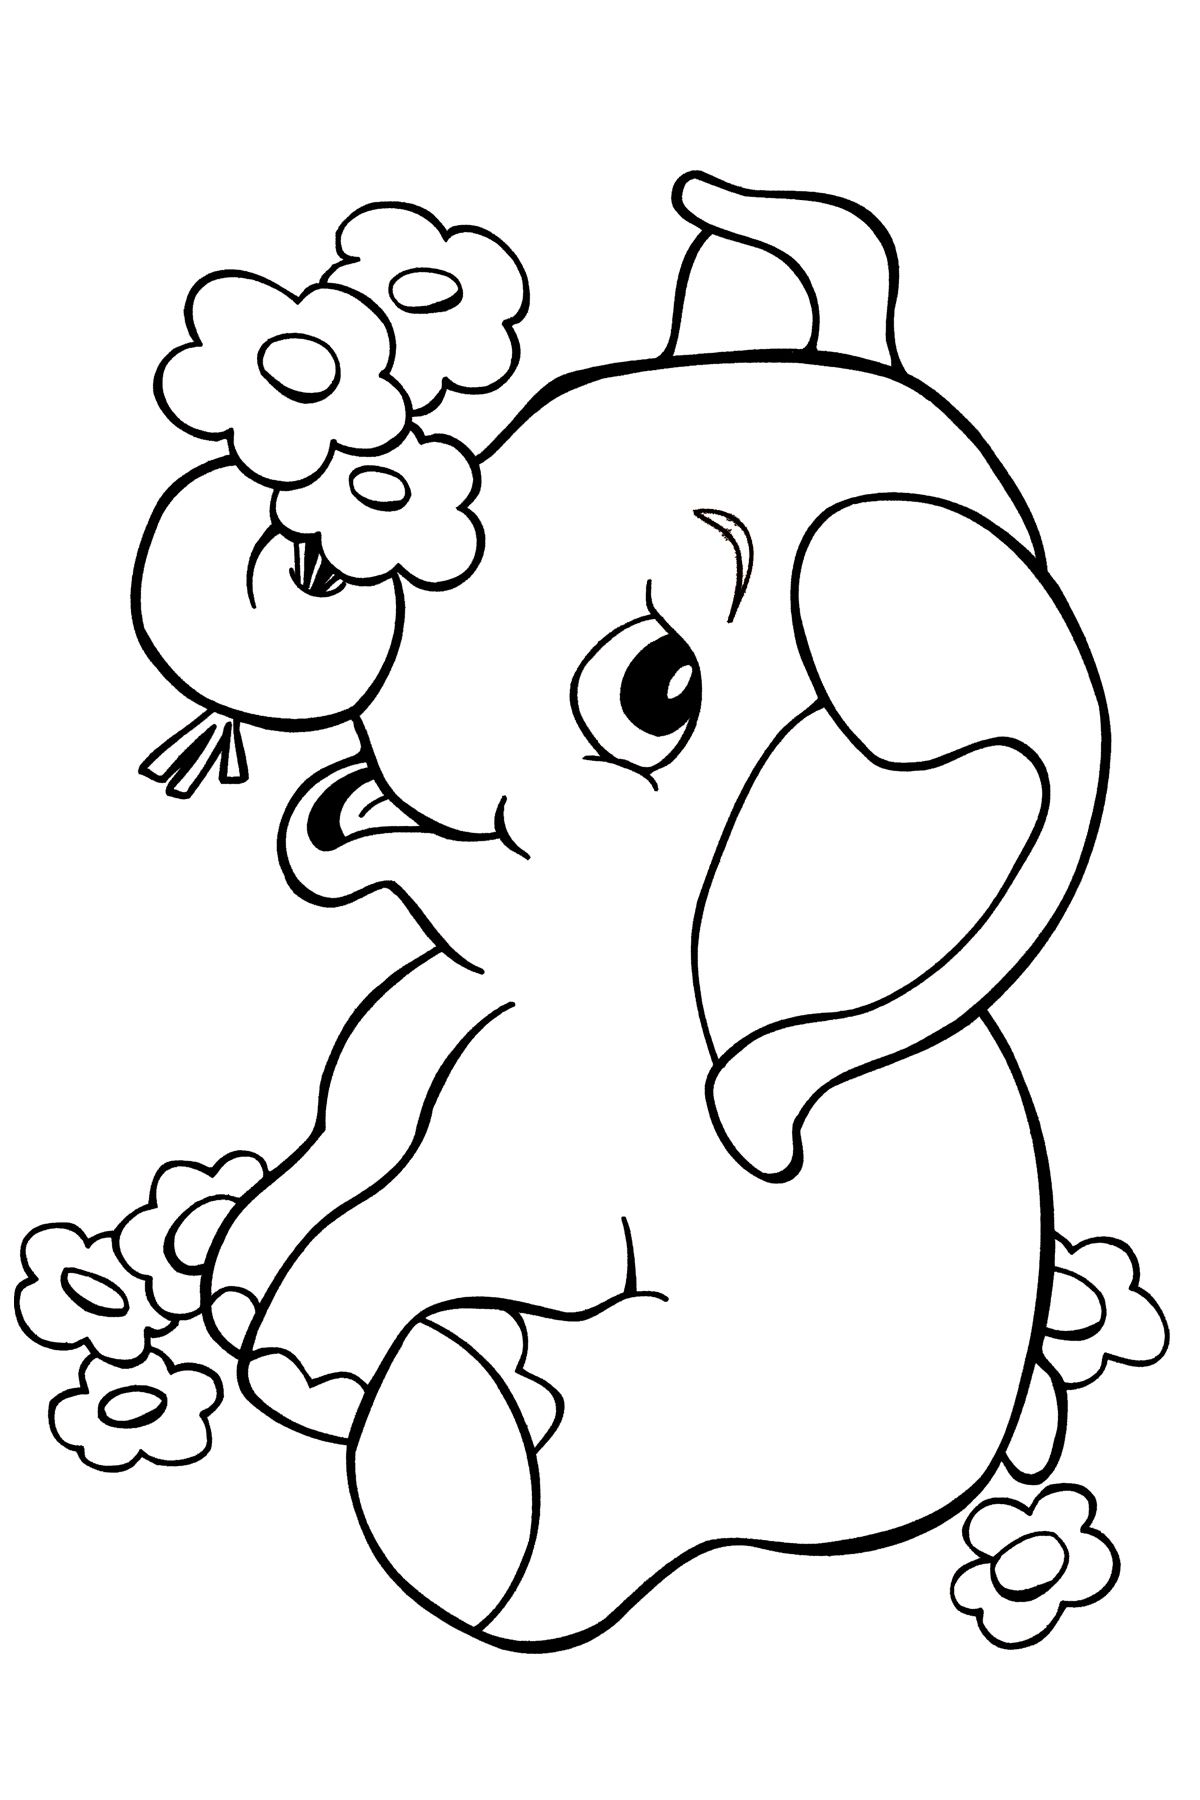 Jungle Coloring Pages   Best Coloring Pages For Kids